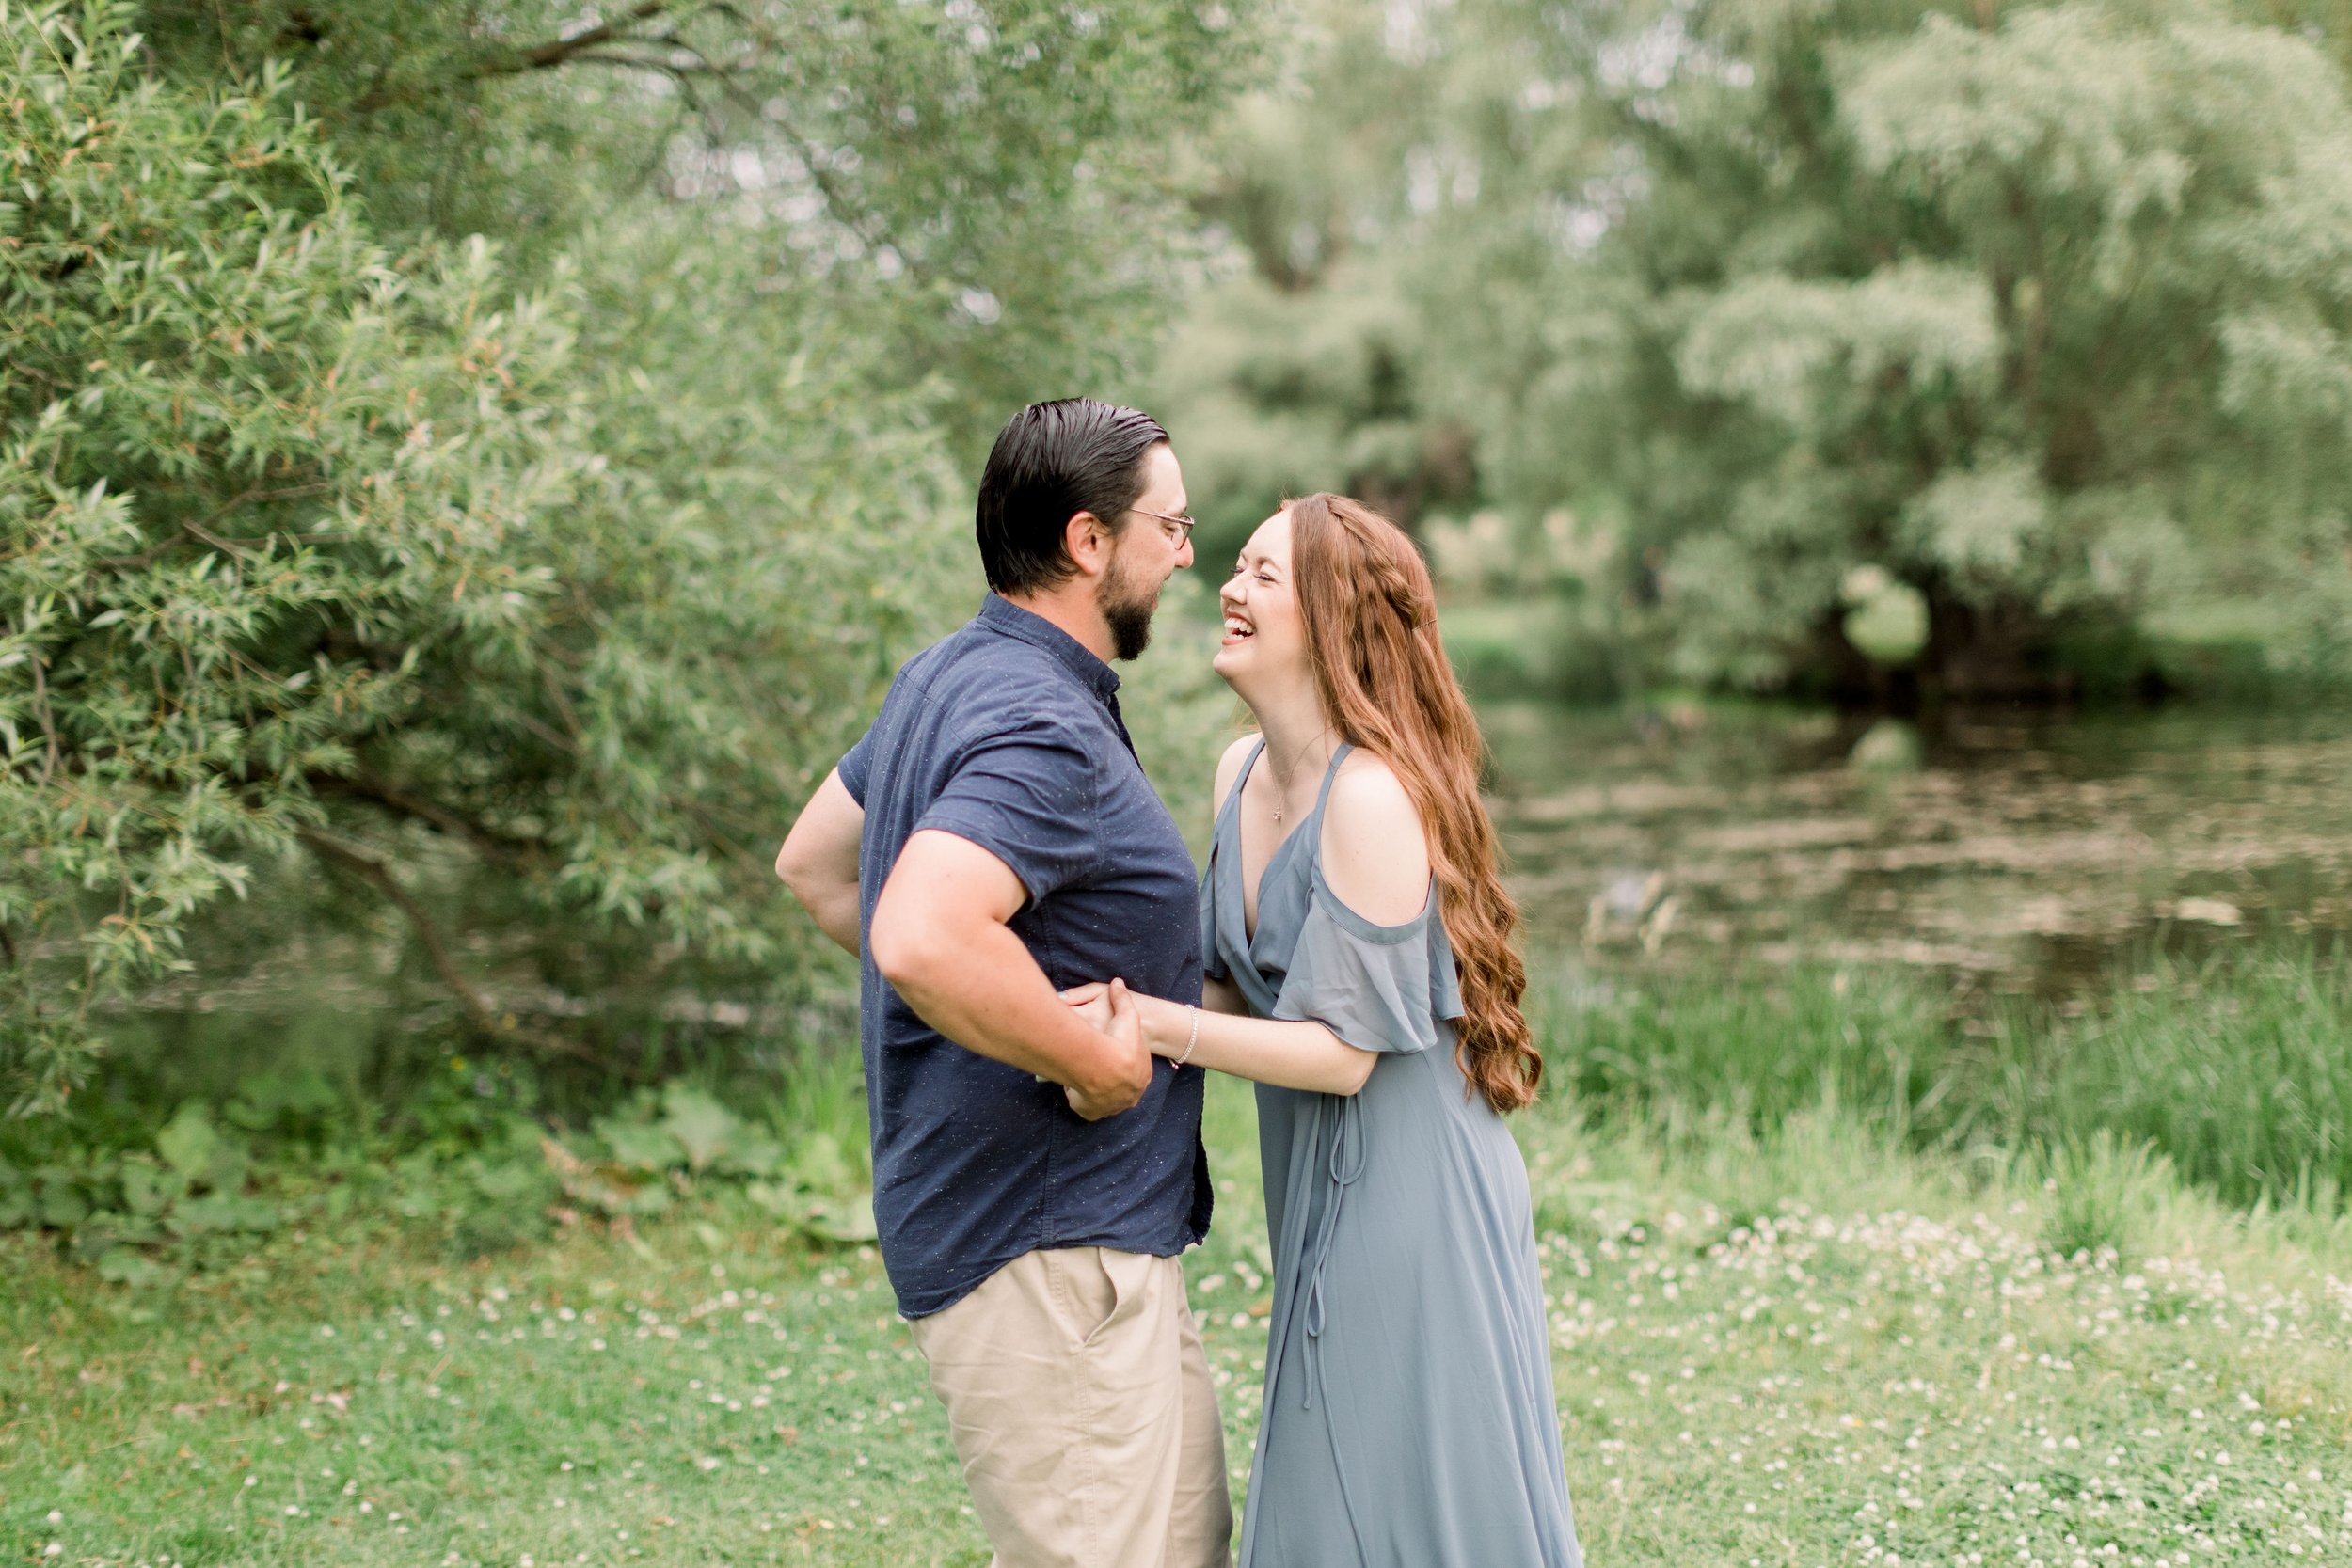  At the Dominion Arboretum in Ottawa, an engaged couple laughs and plays by Chelsea Mason Photography. laughing engaged couple Ottawa #chelseamasonphotography #chelseamasonengagements #Ottawaengagements #DominonArboretum #Ottawaphotographers 